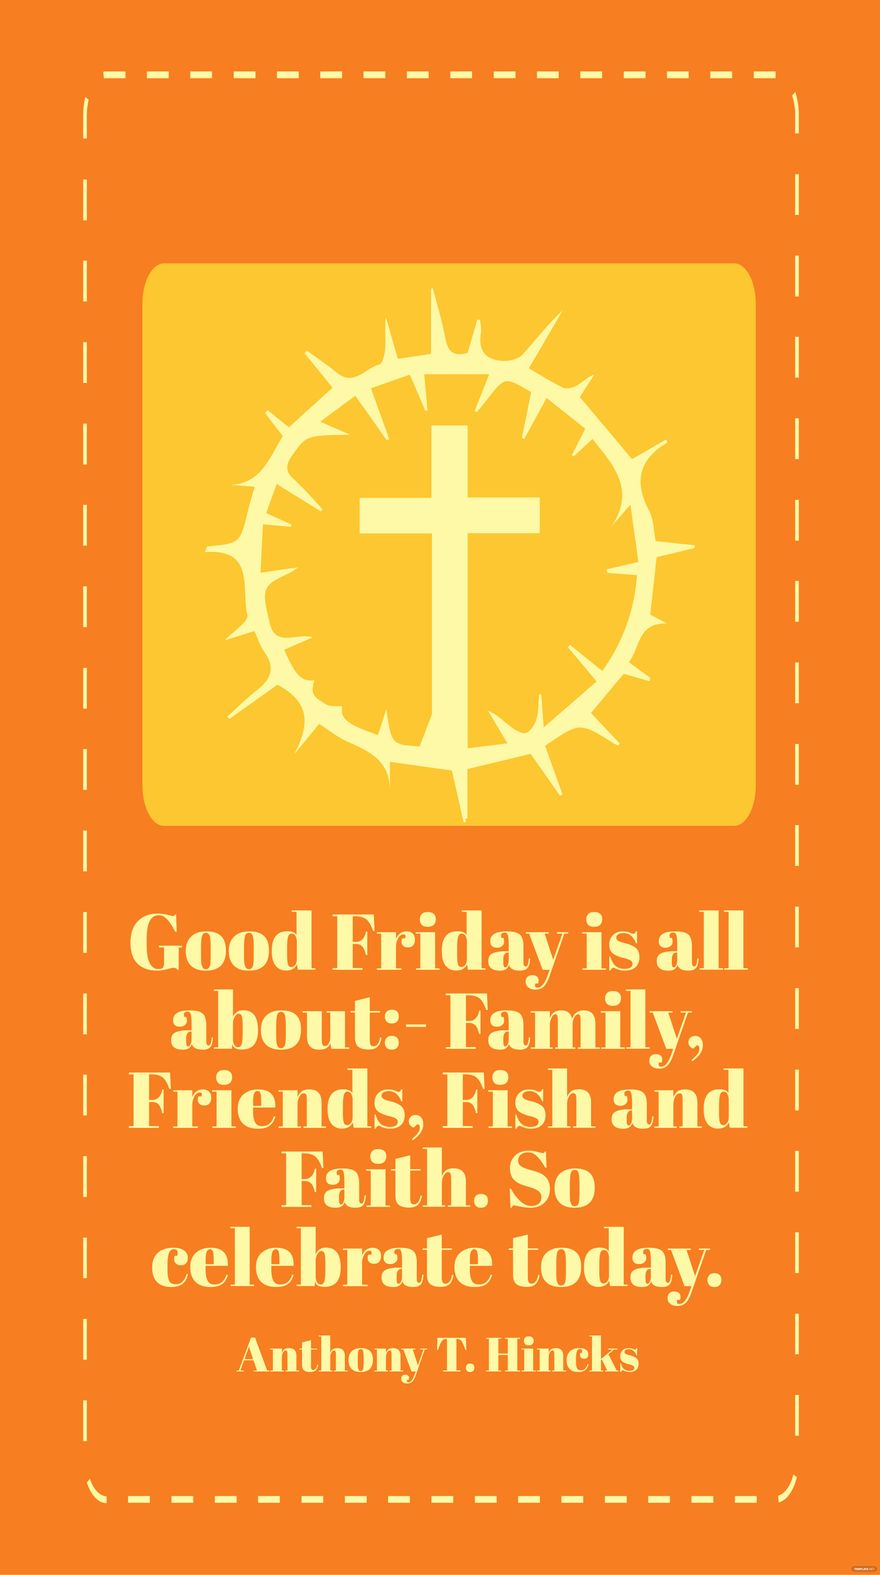 Free Anthony T. Hincks - Good Friday is all about:- Family, Friends, Fish and Faith. So celebrate today. in JPG